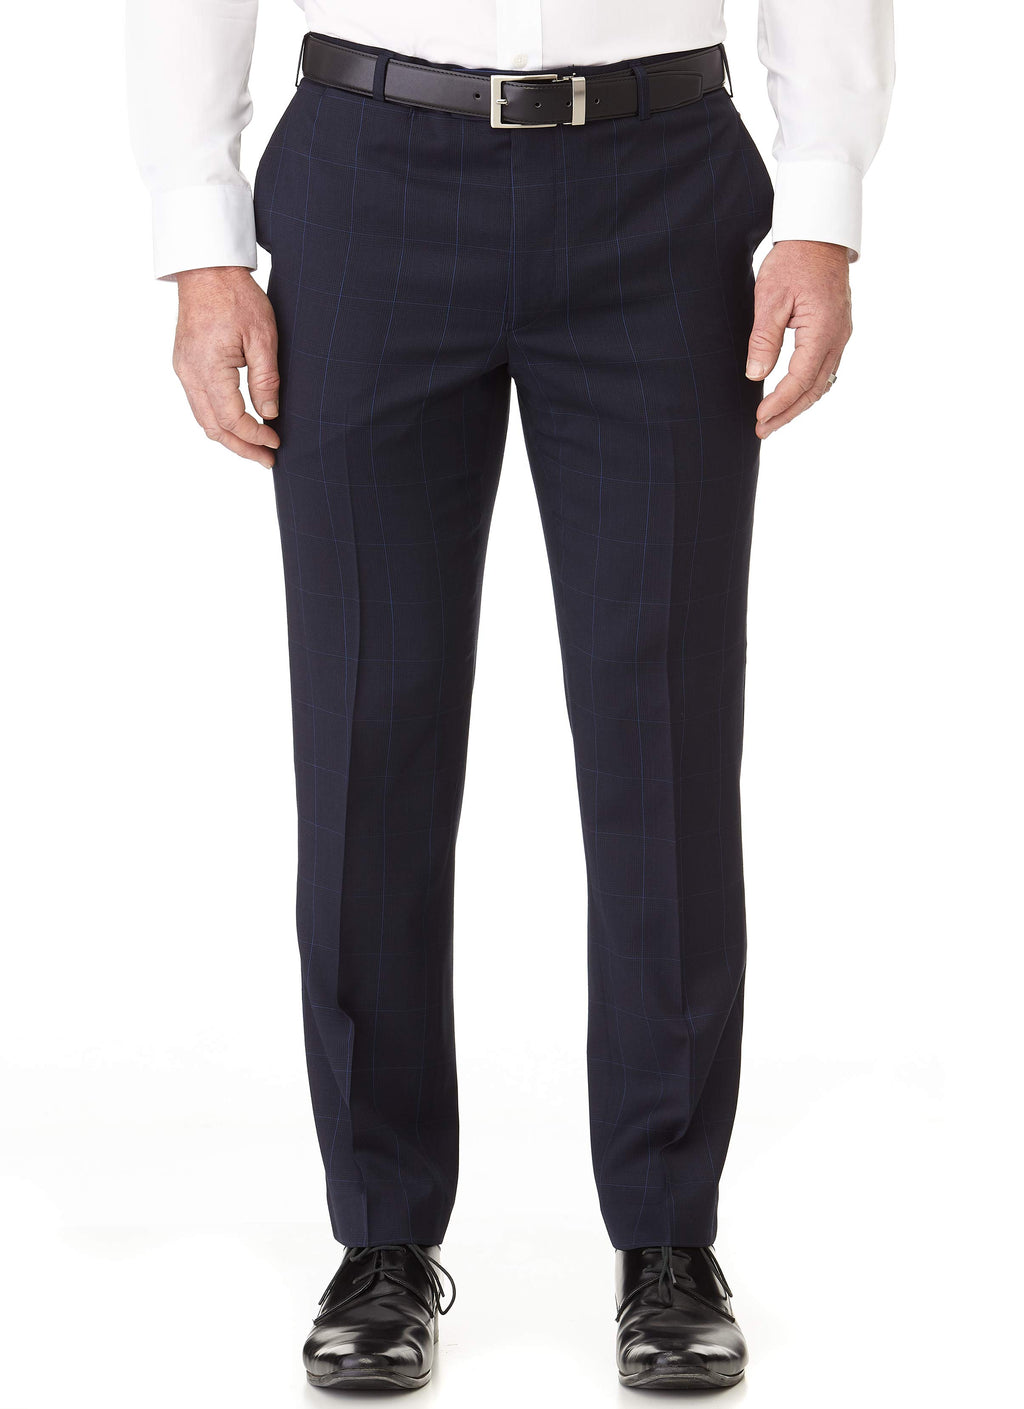 OTWAY NAVY WINDOWPANE CONTEMPORARY FIT SUIT